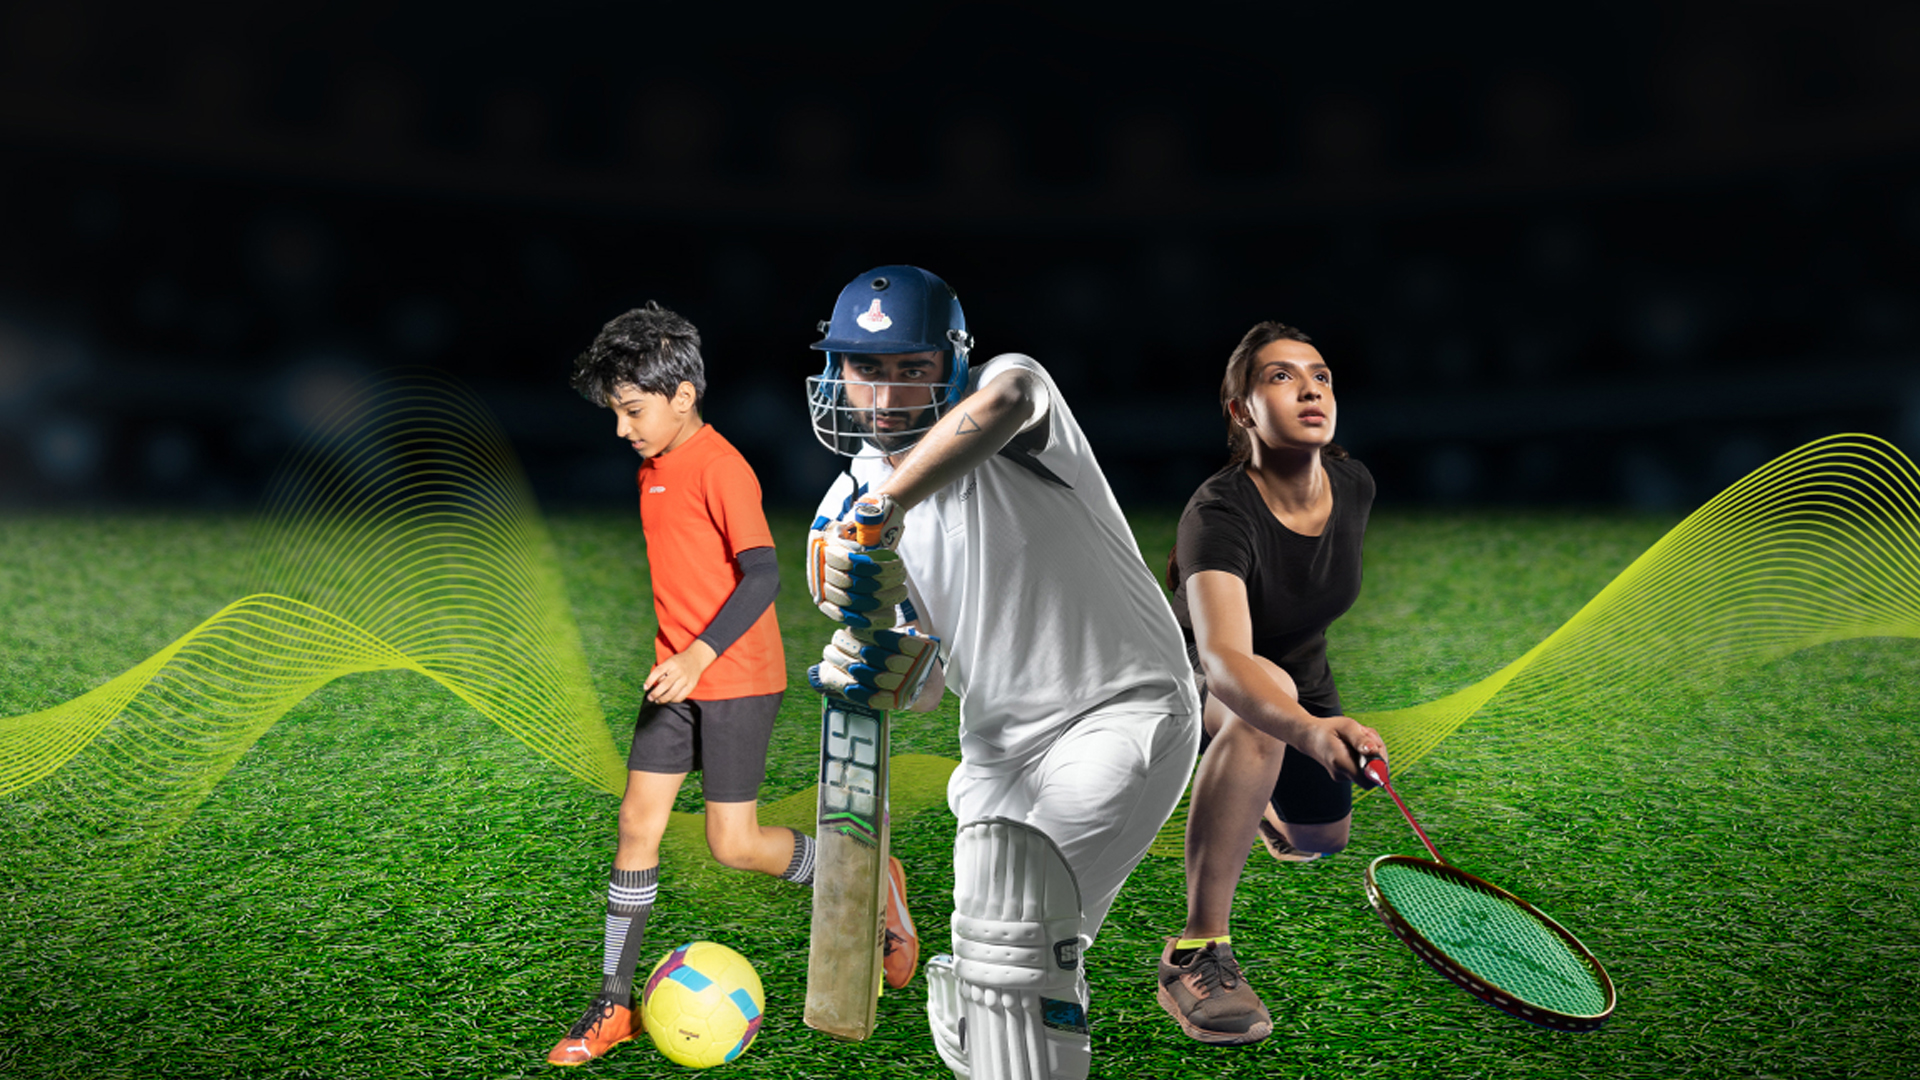 A poster for an indoor sports arena in which a boy is seen with a football, a man in a cricket outfit with a bat, and a woman with a badminton racket.